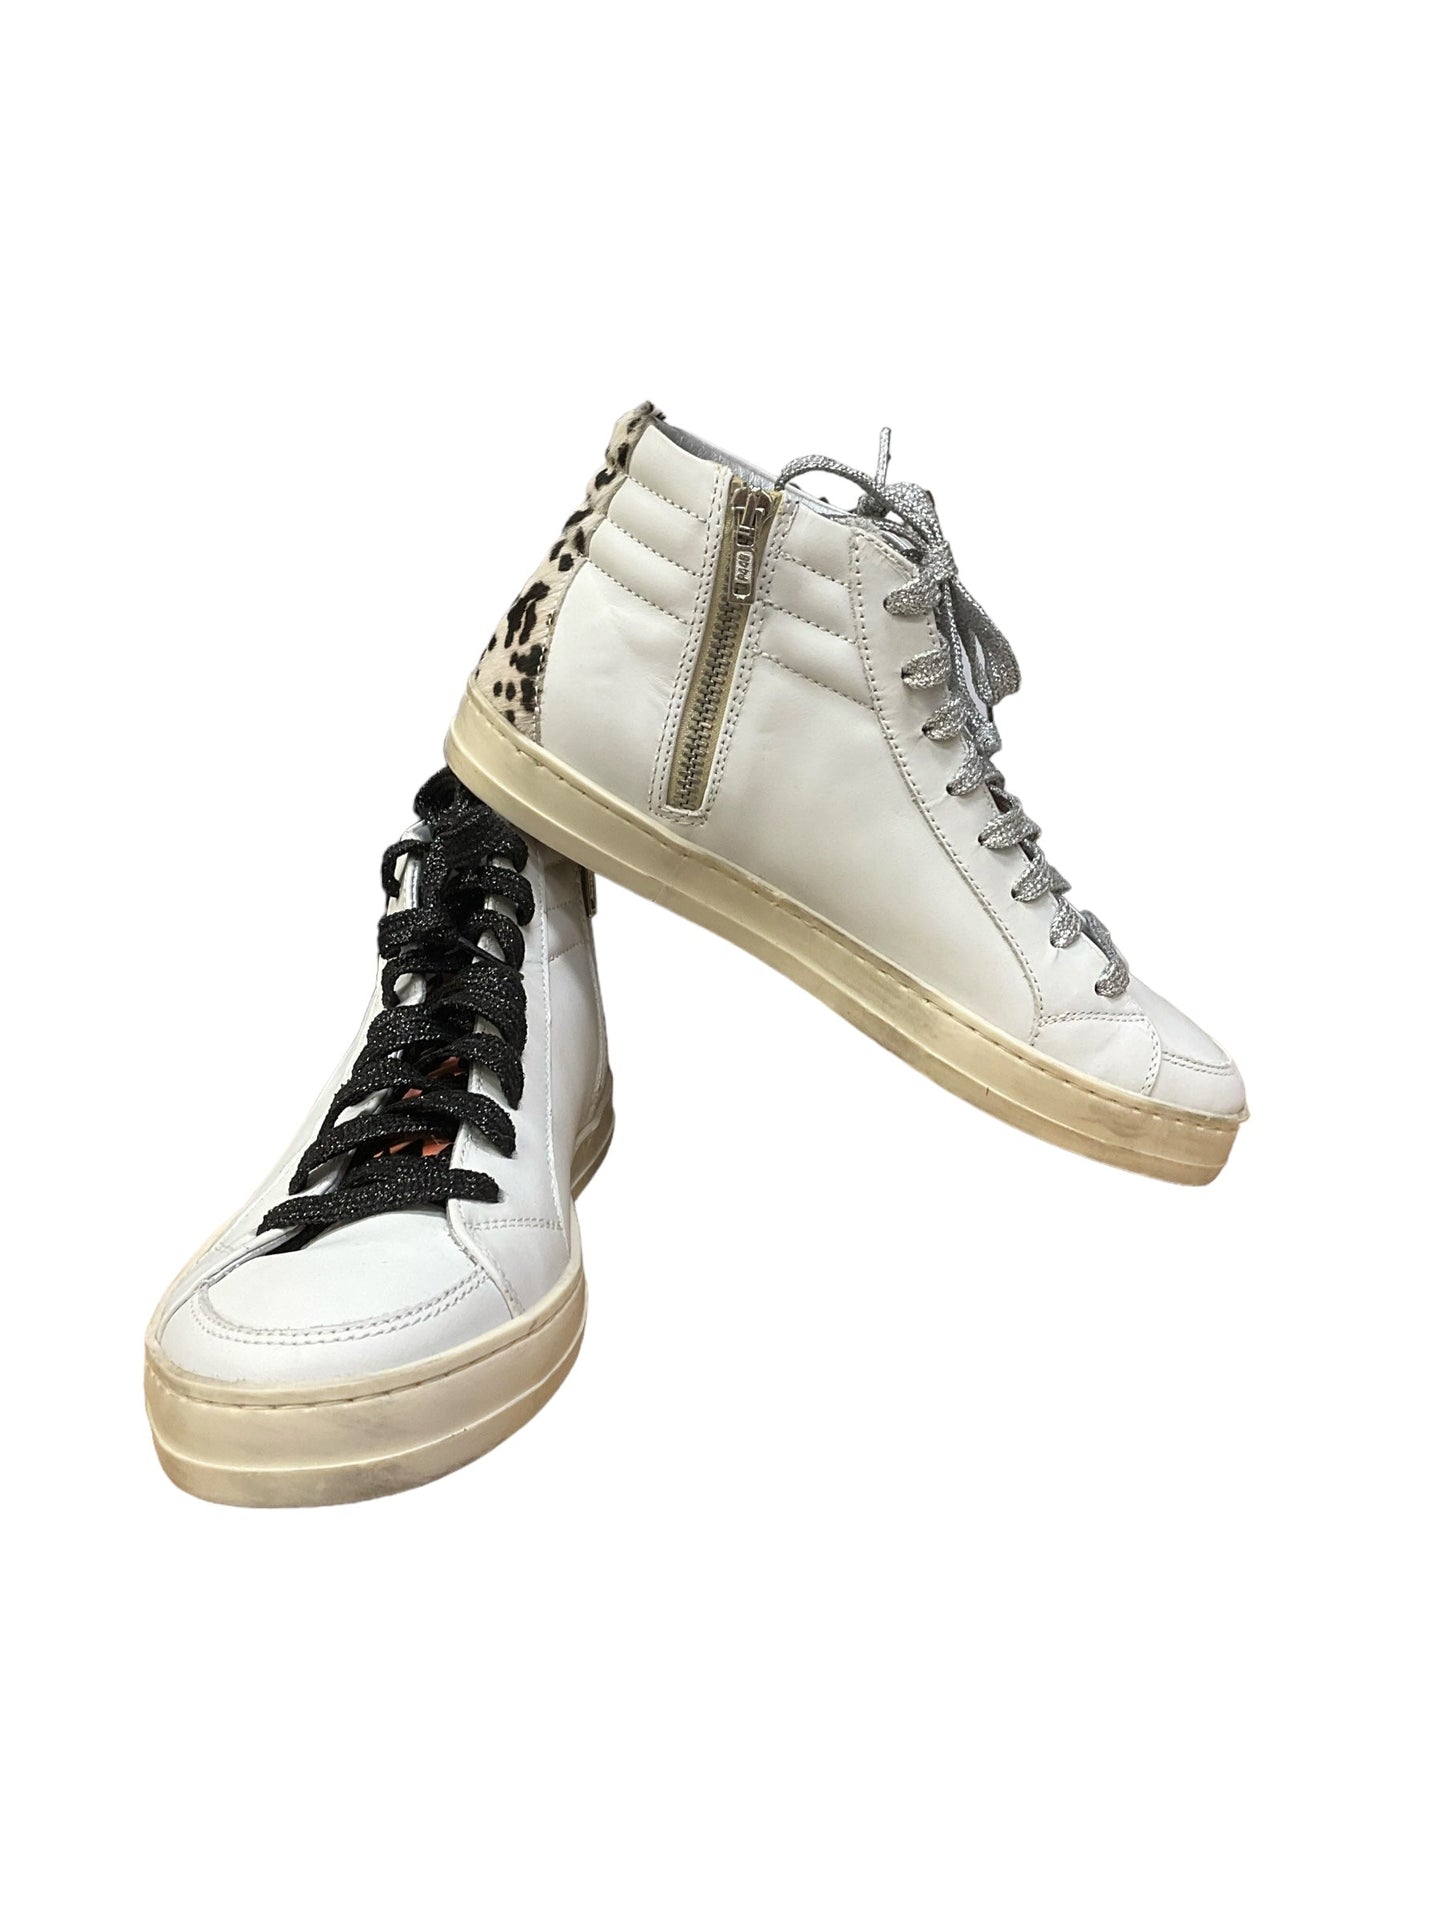 White Shoes Sneakers P448, Size 7